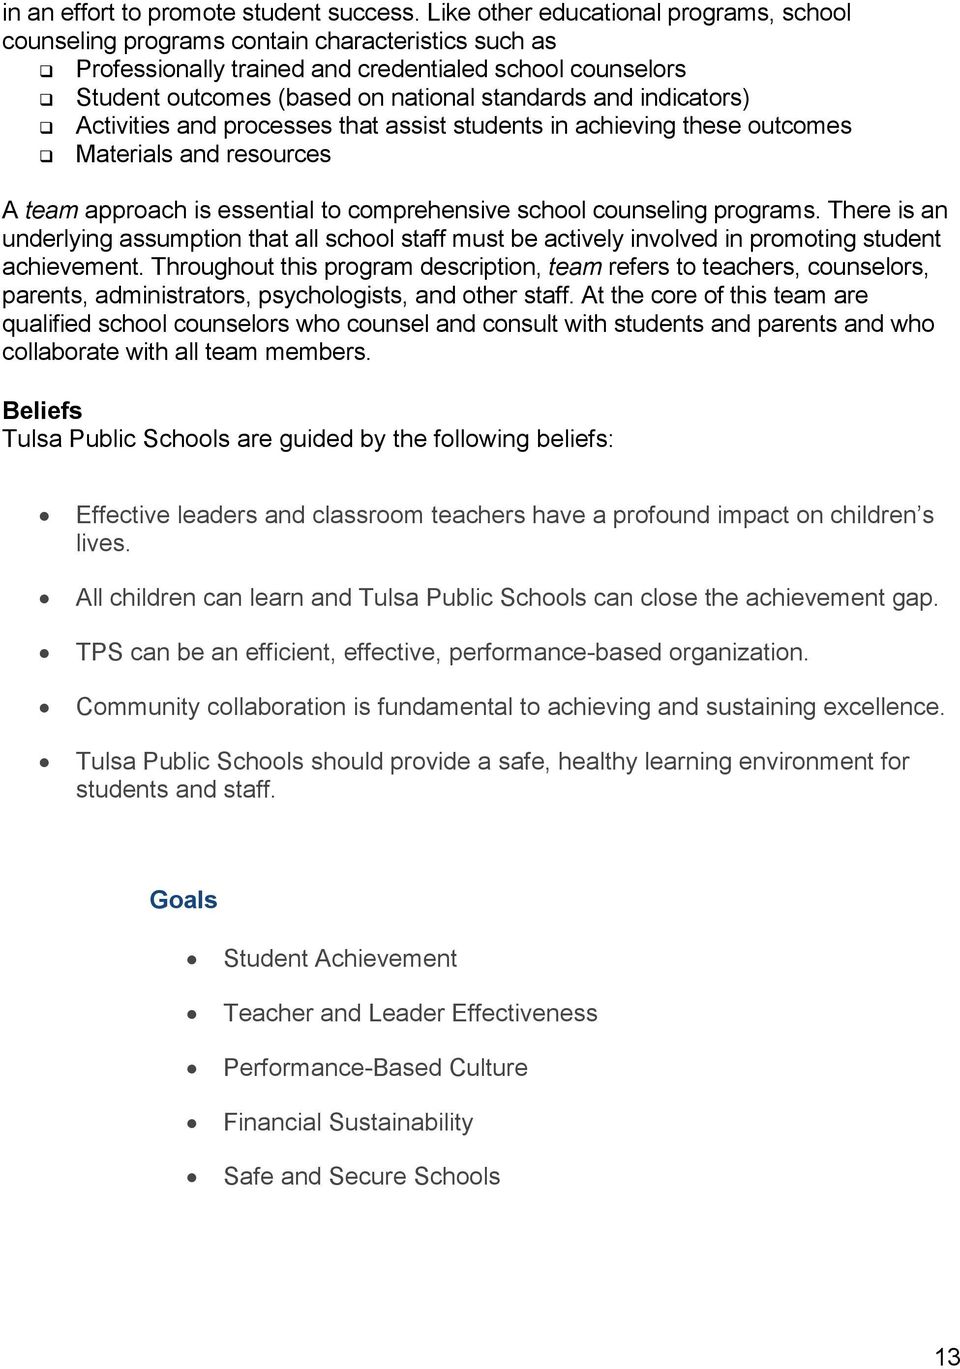 indicators) Activities and processes that assist students in achieving these outcomes Materials and resources A team approach is essential to comprehensive school counseling programs.